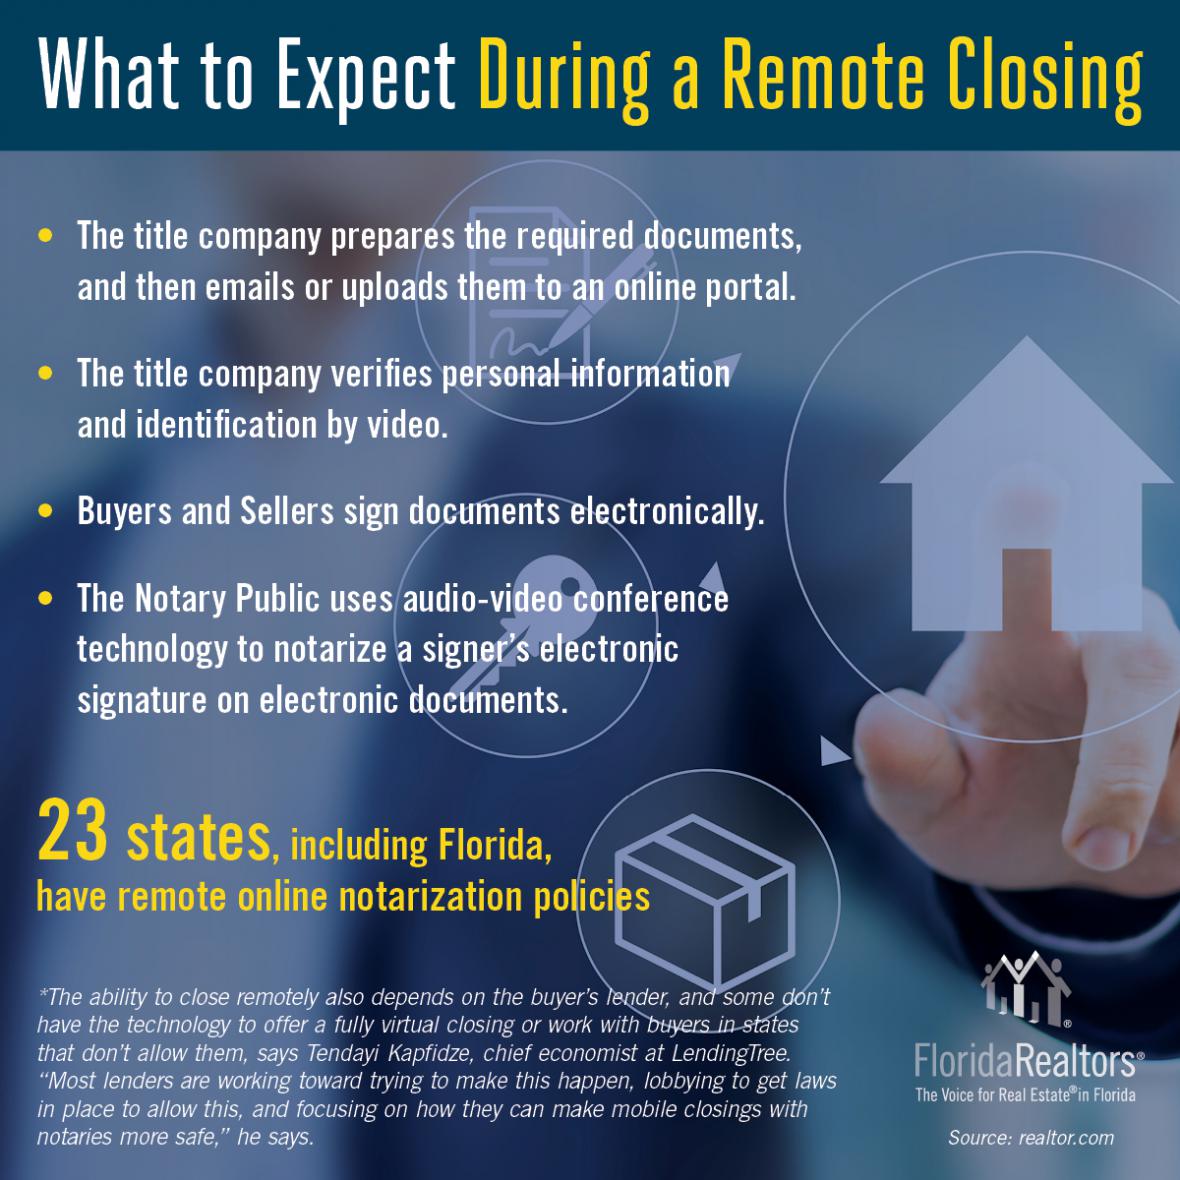 What to Expect During a Remote Closing infographic